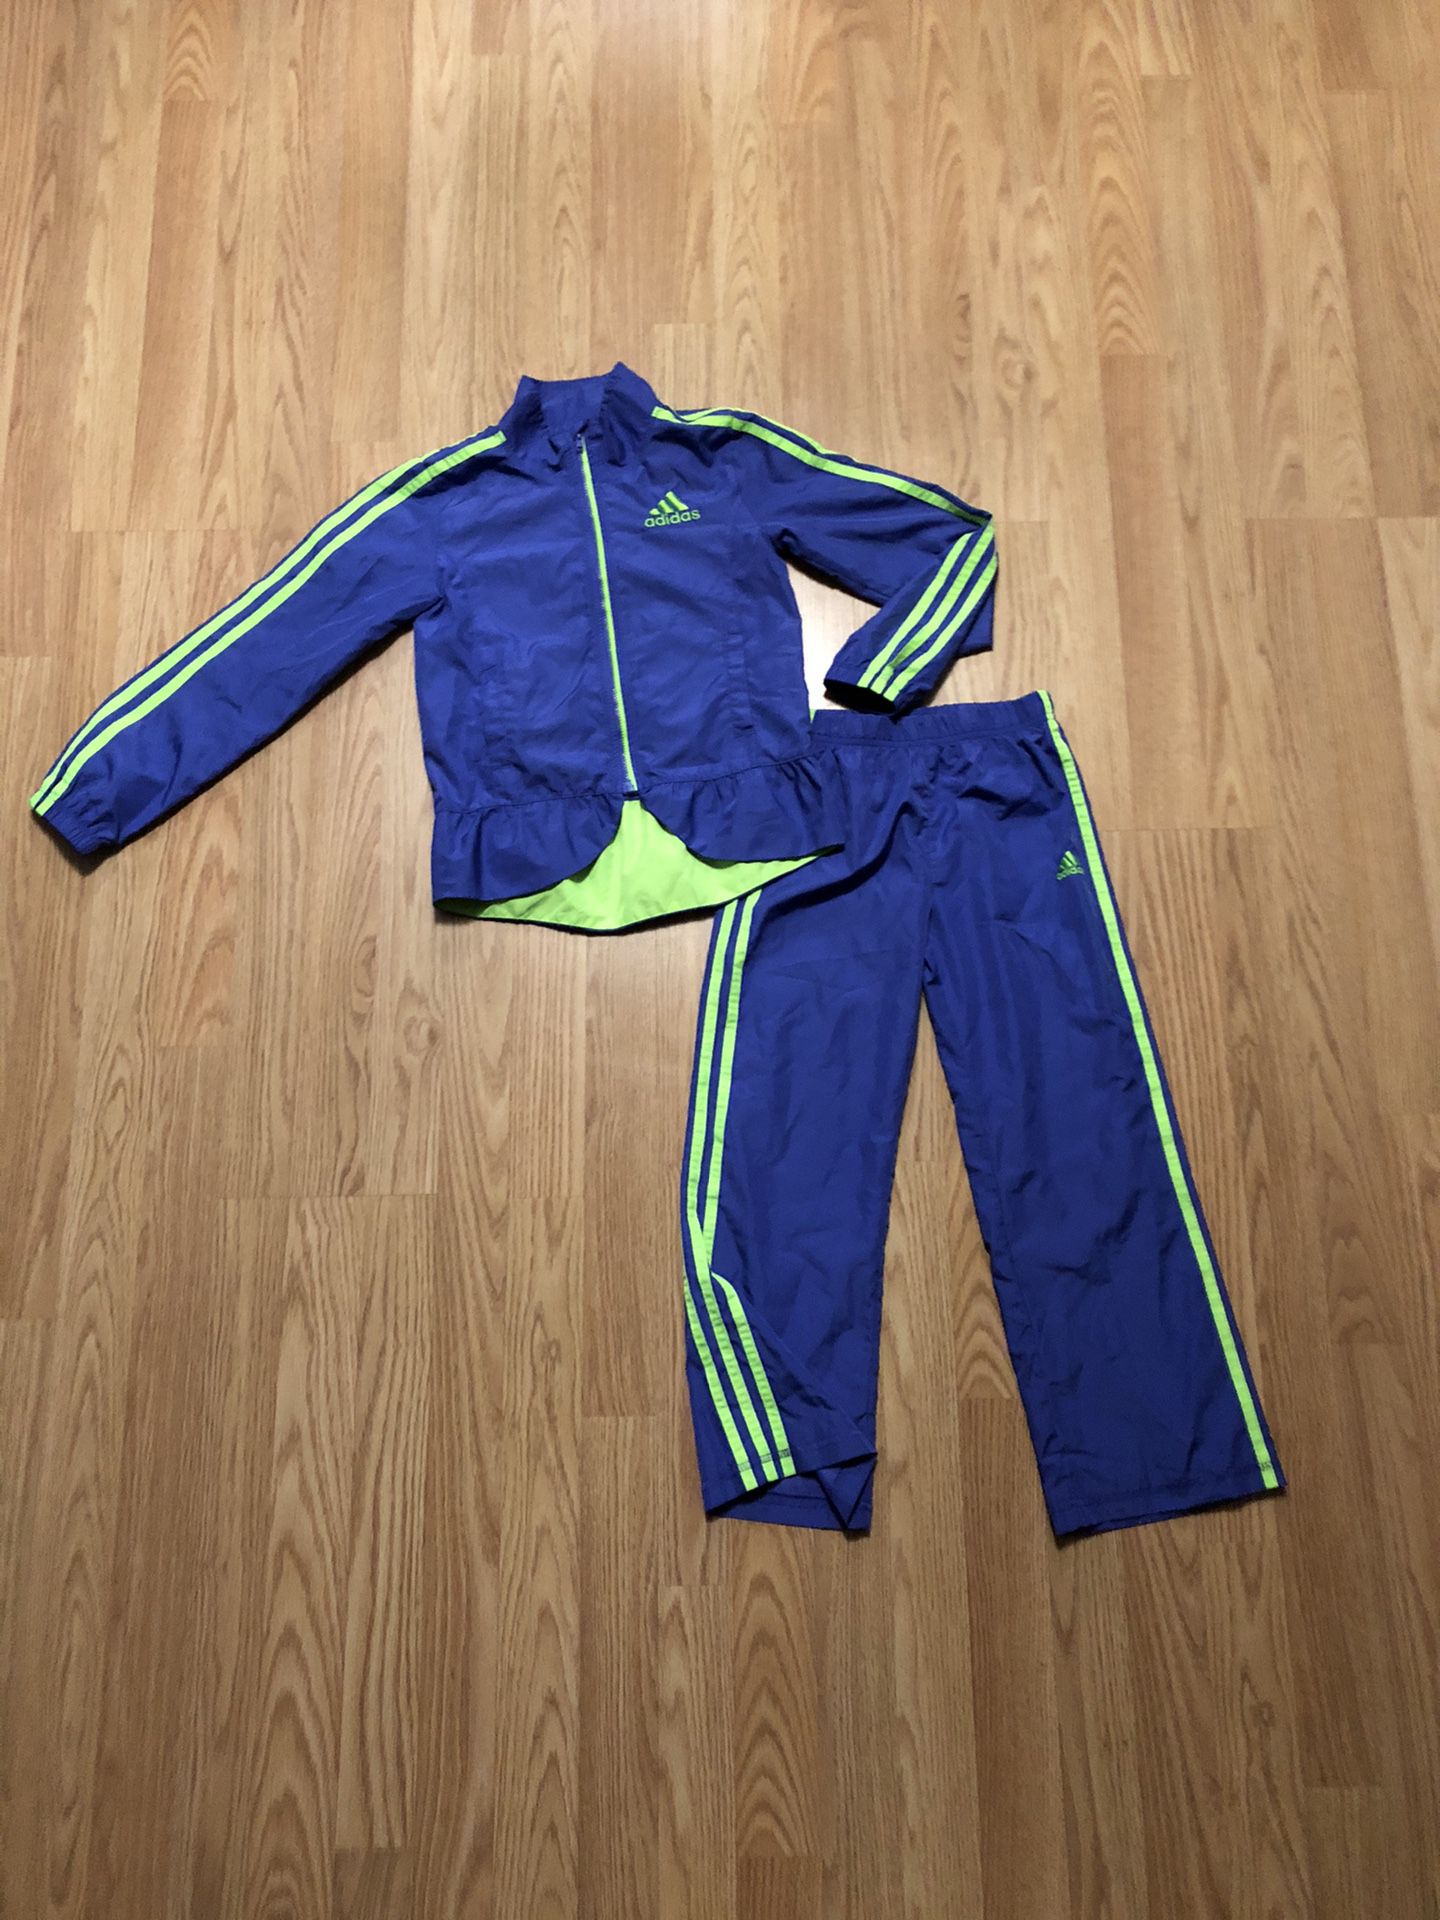 Girls Adidas outfit size 6 purple/ Neon